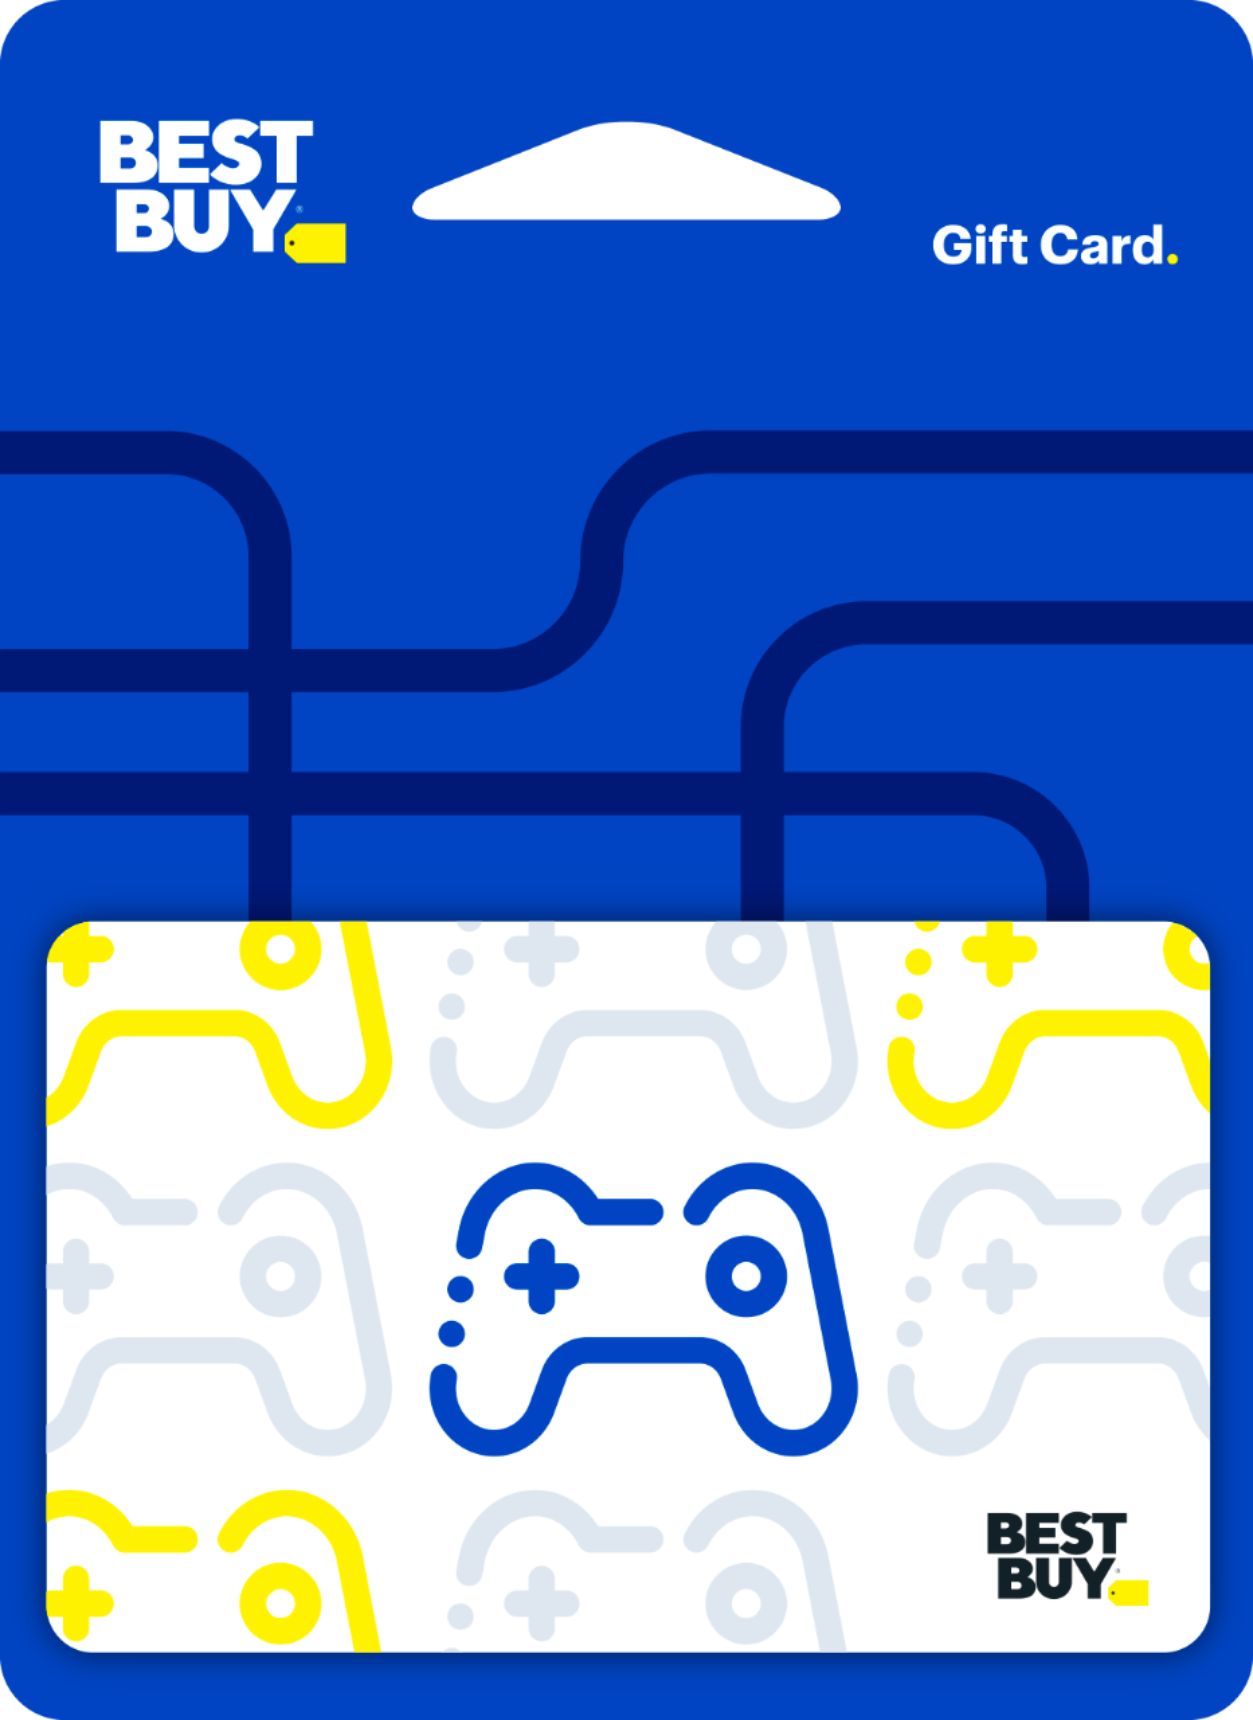 Gaming Gift Cards